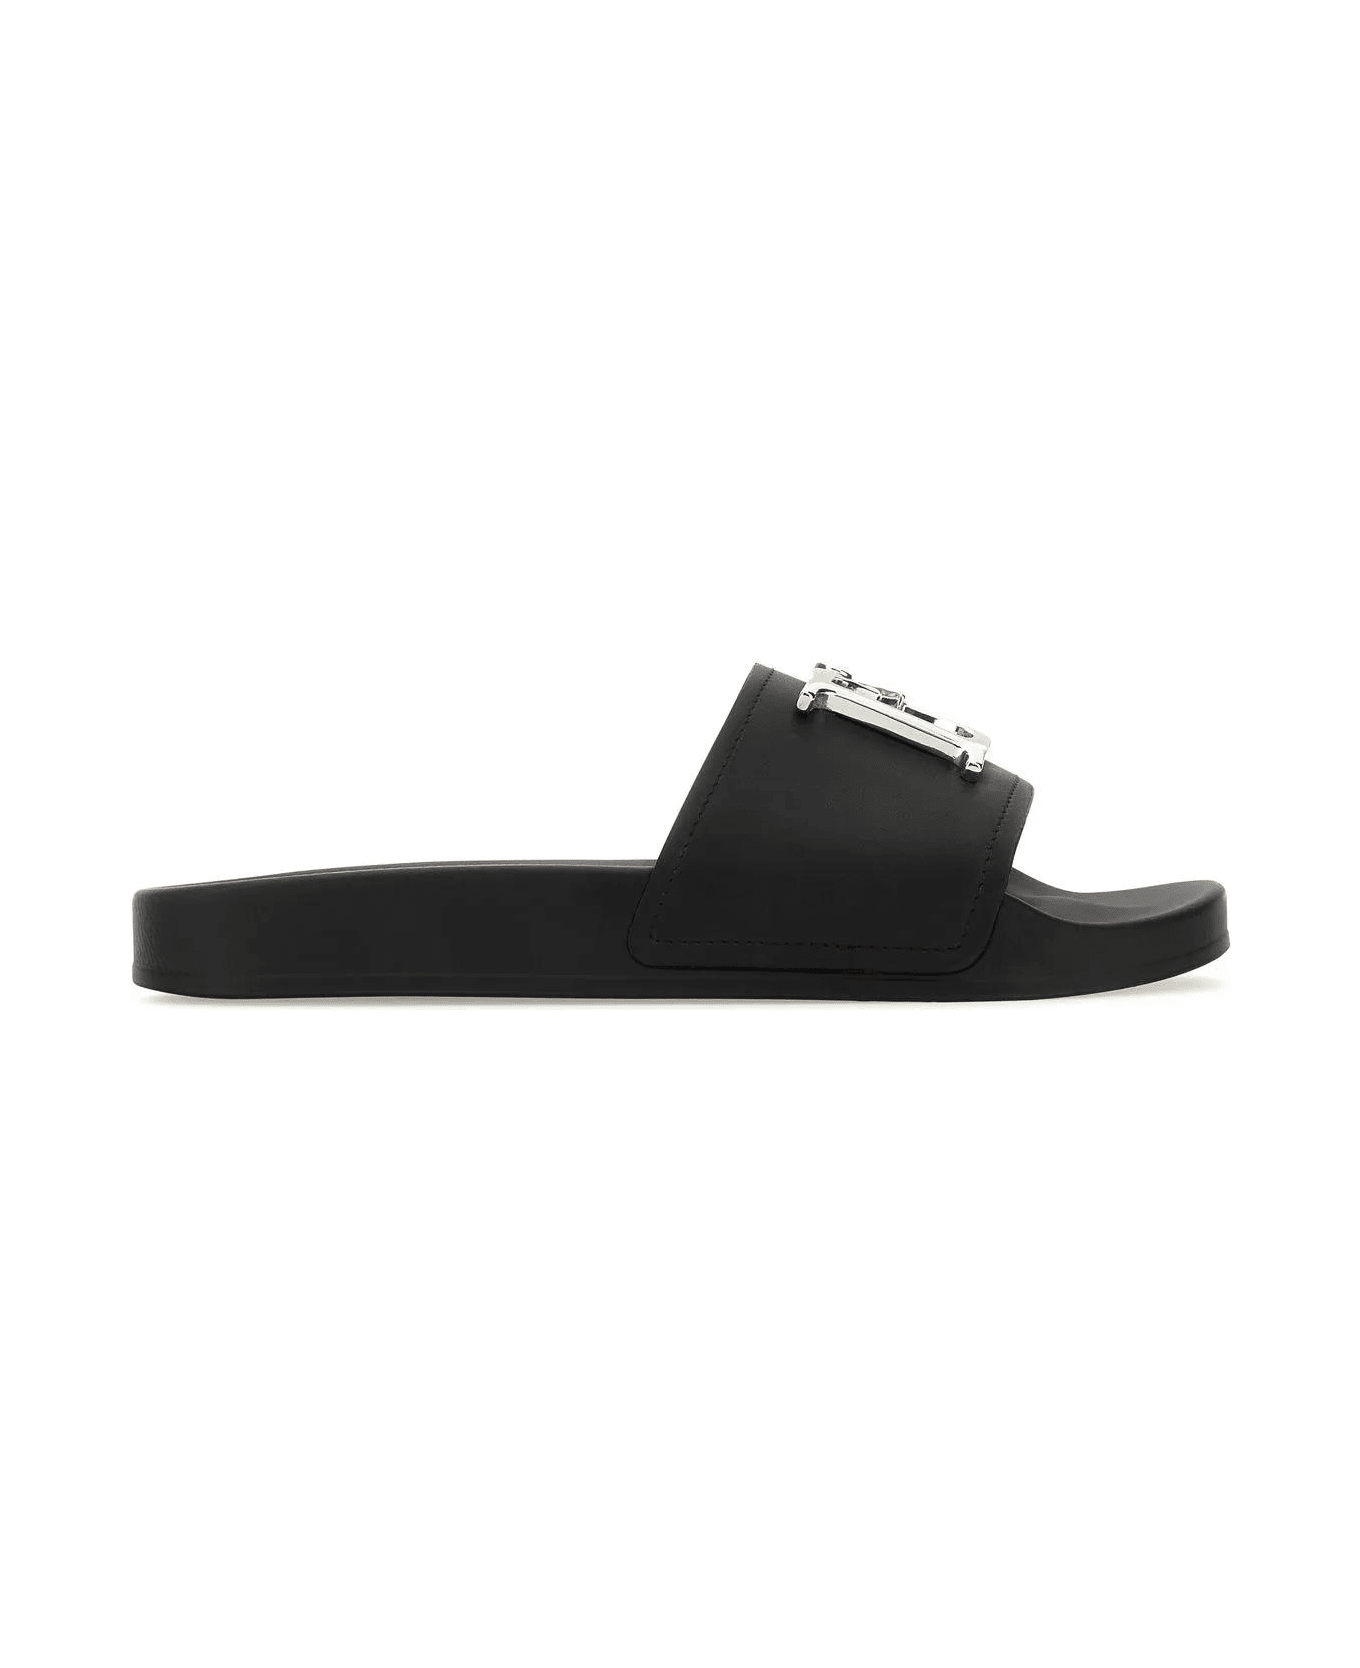 Dsquared2 Black Leather D2 Statement Slippers - Nero サンダル